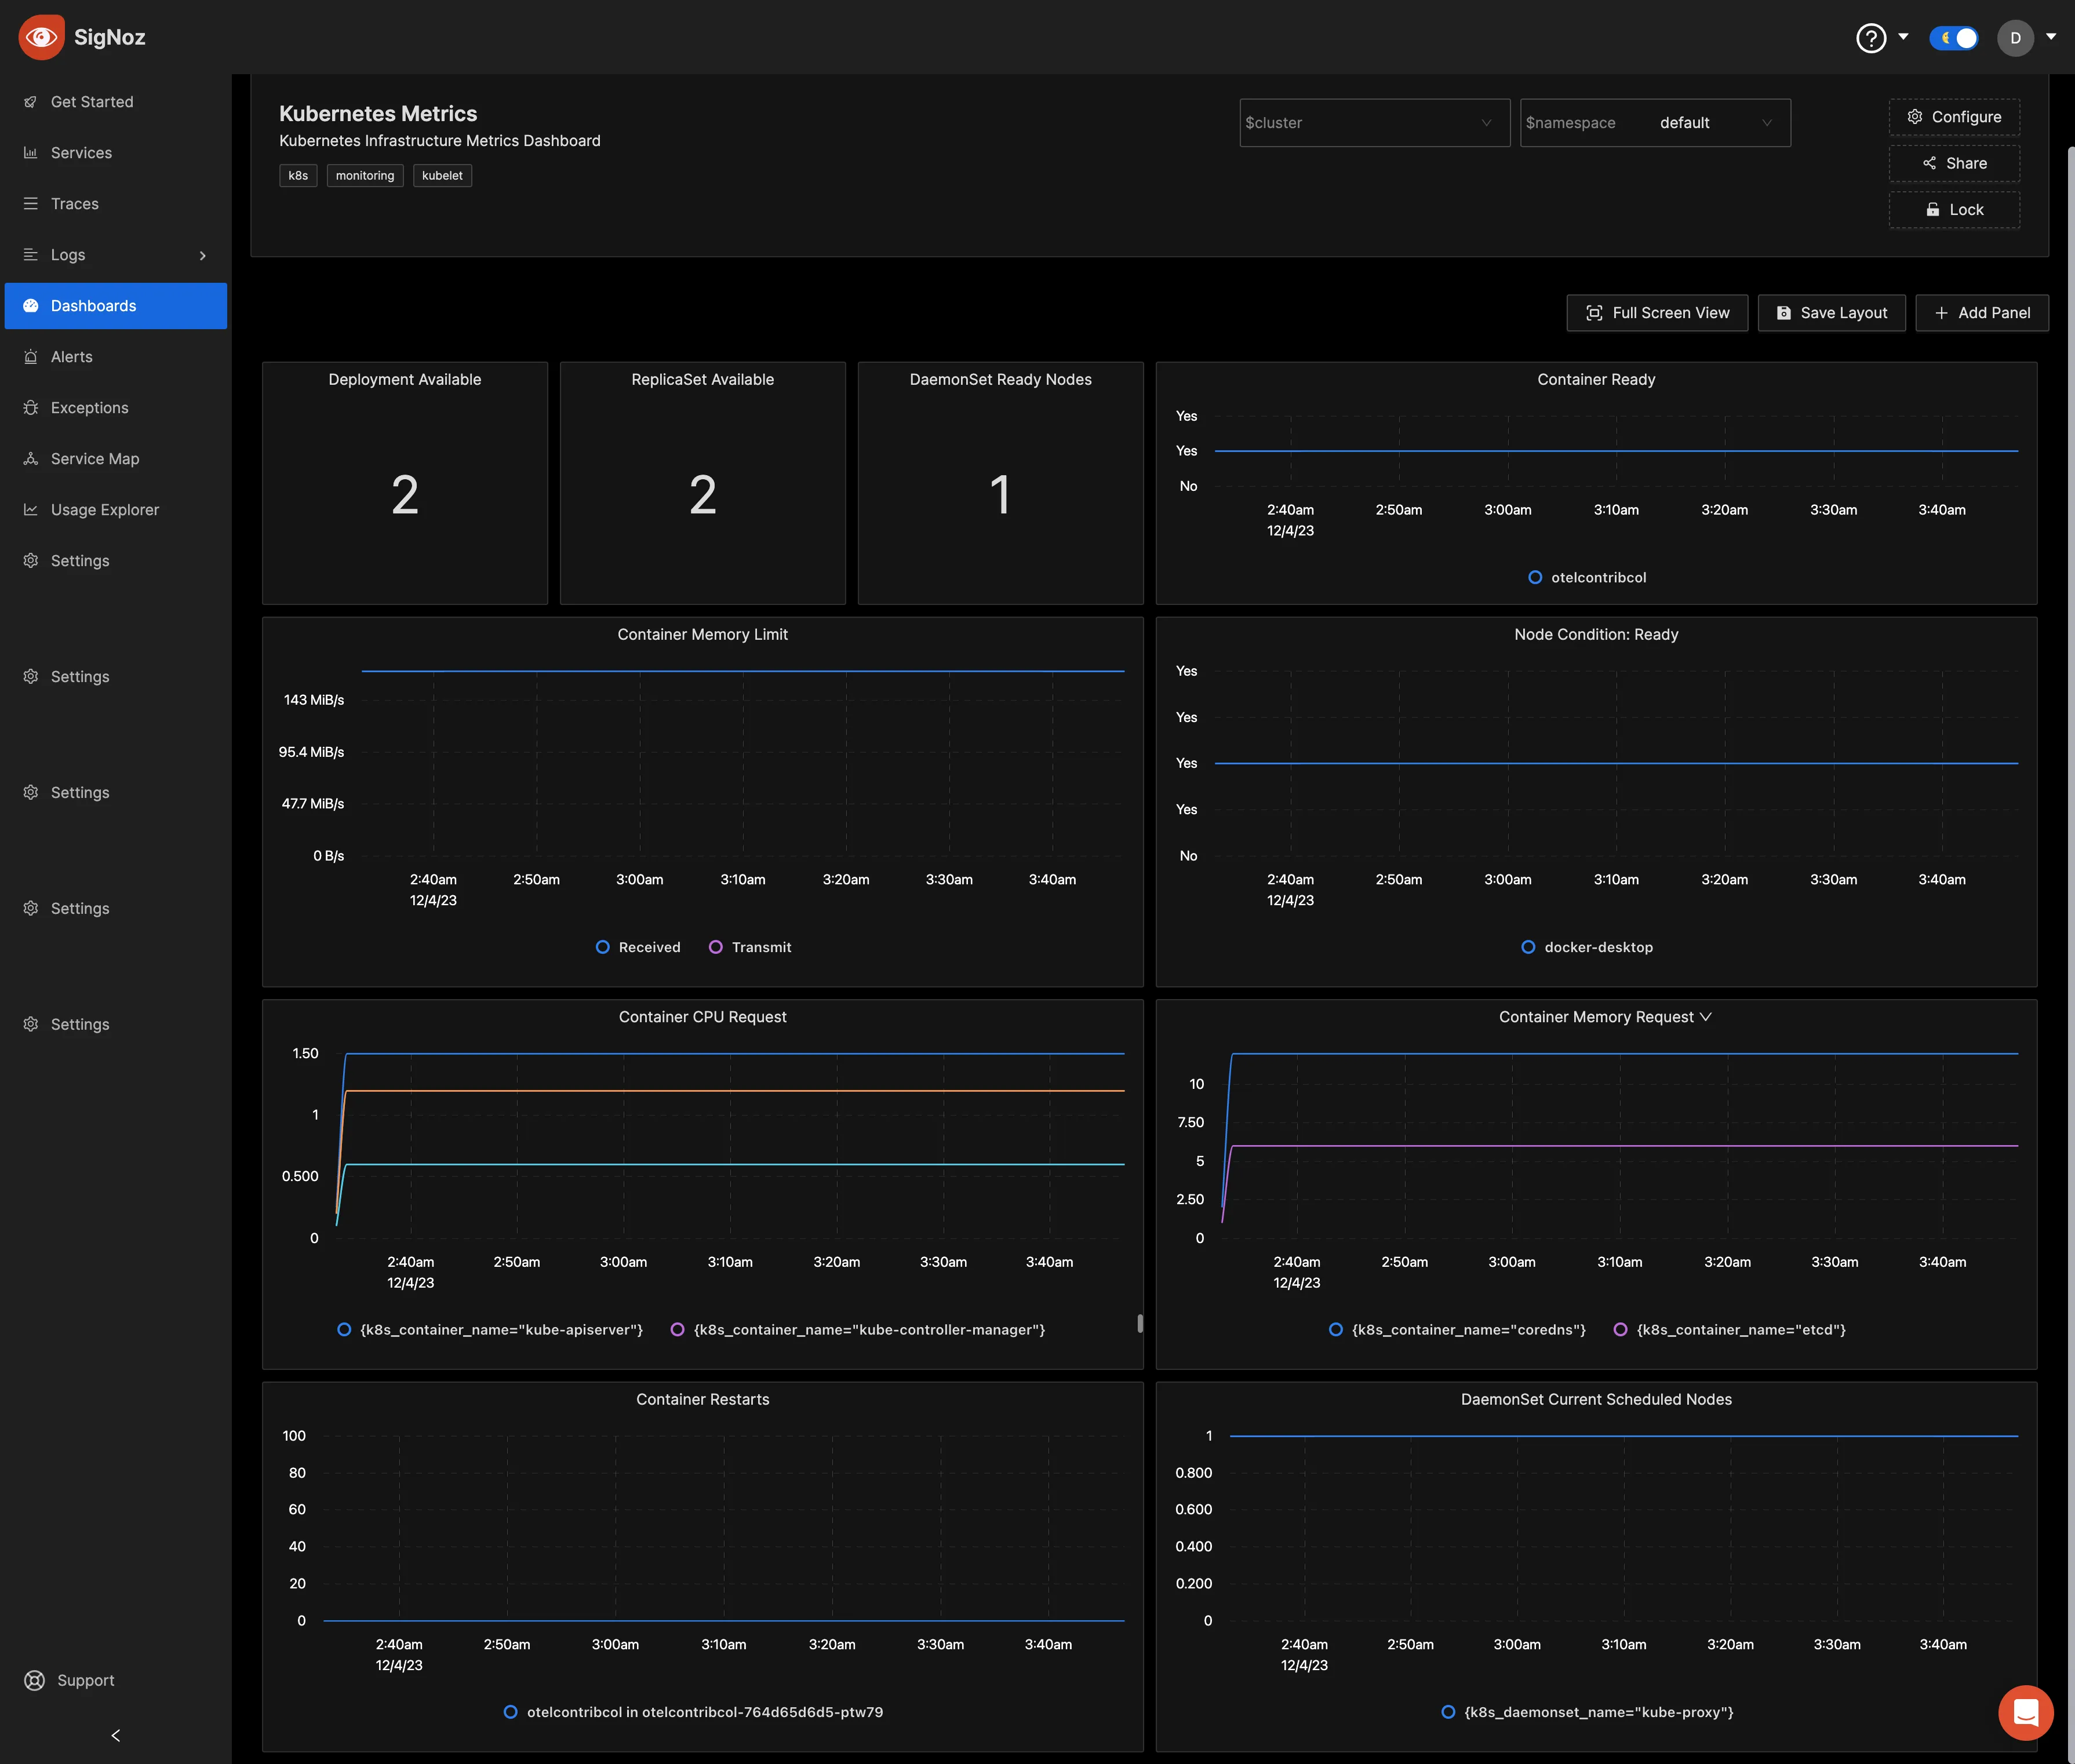 Monitoring dashboard for the Kubernetes cluster